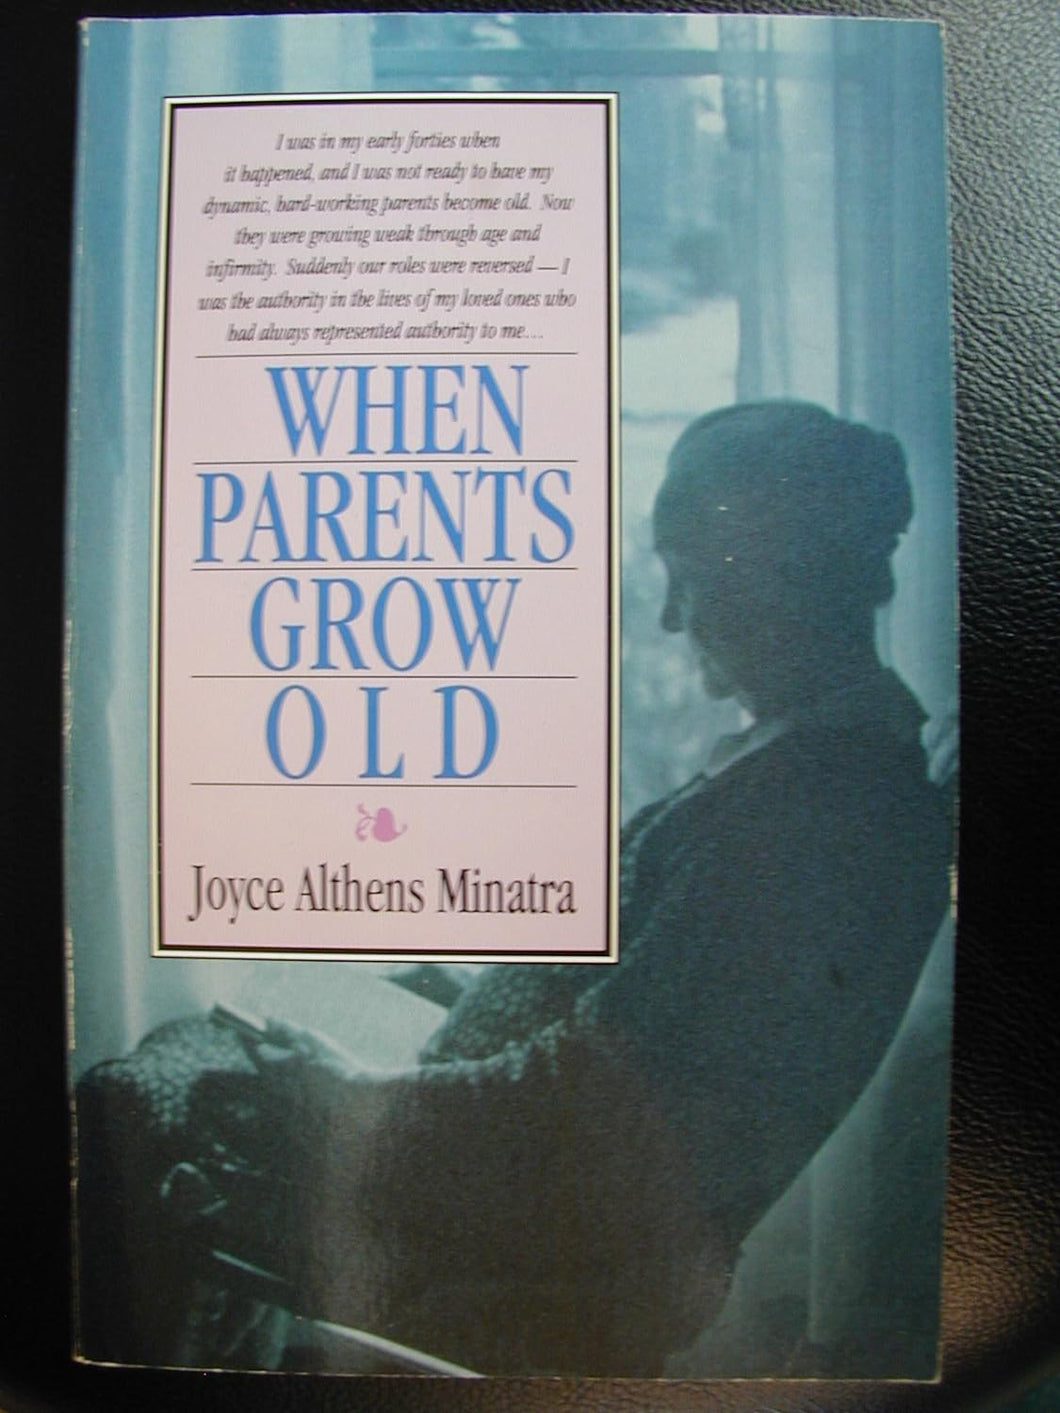 When Parents Grow Old by Joyce Althens Minatra